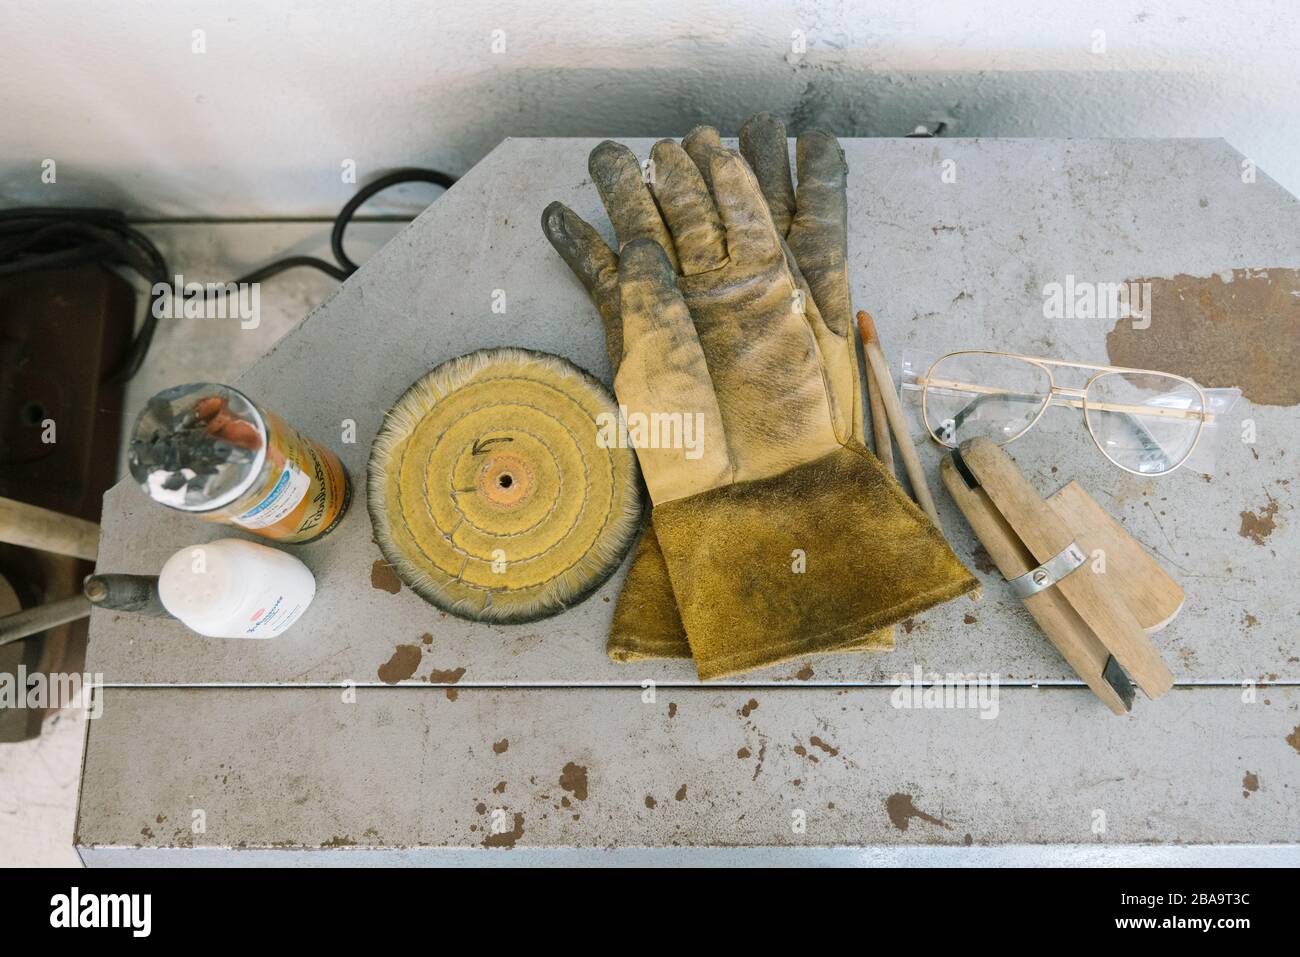 Dirty gloves rest by glasses and assorted crafting tools and resources Stock Photo